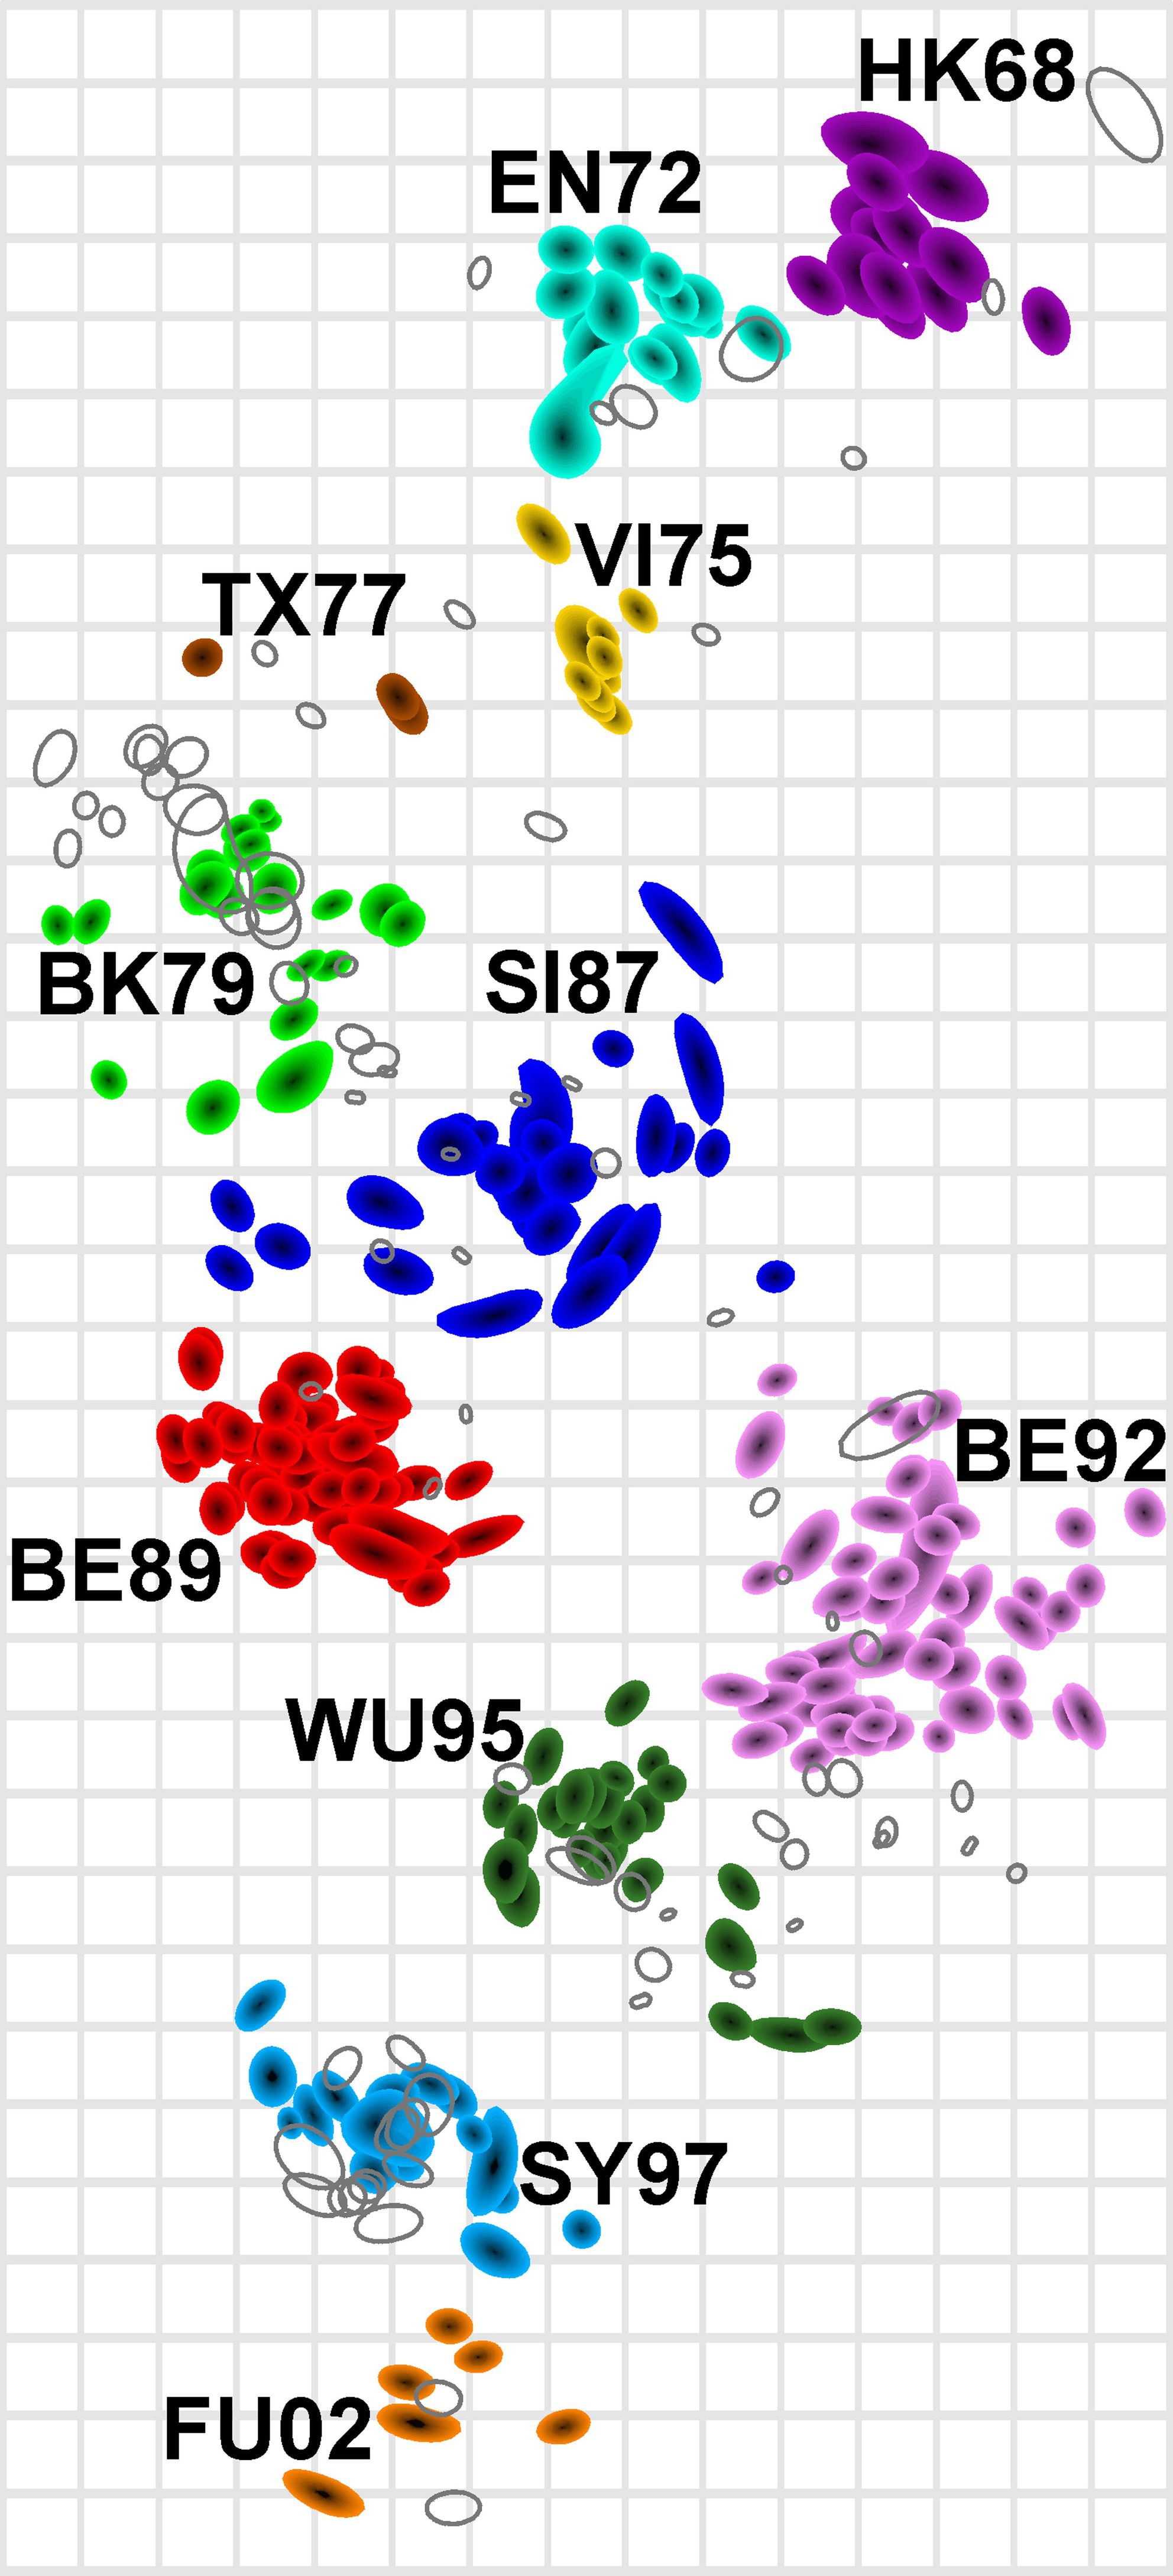 A computer-generated diagram shows clusters of dots against a grid. Each cluster is in a different color and has a label such as HK68.